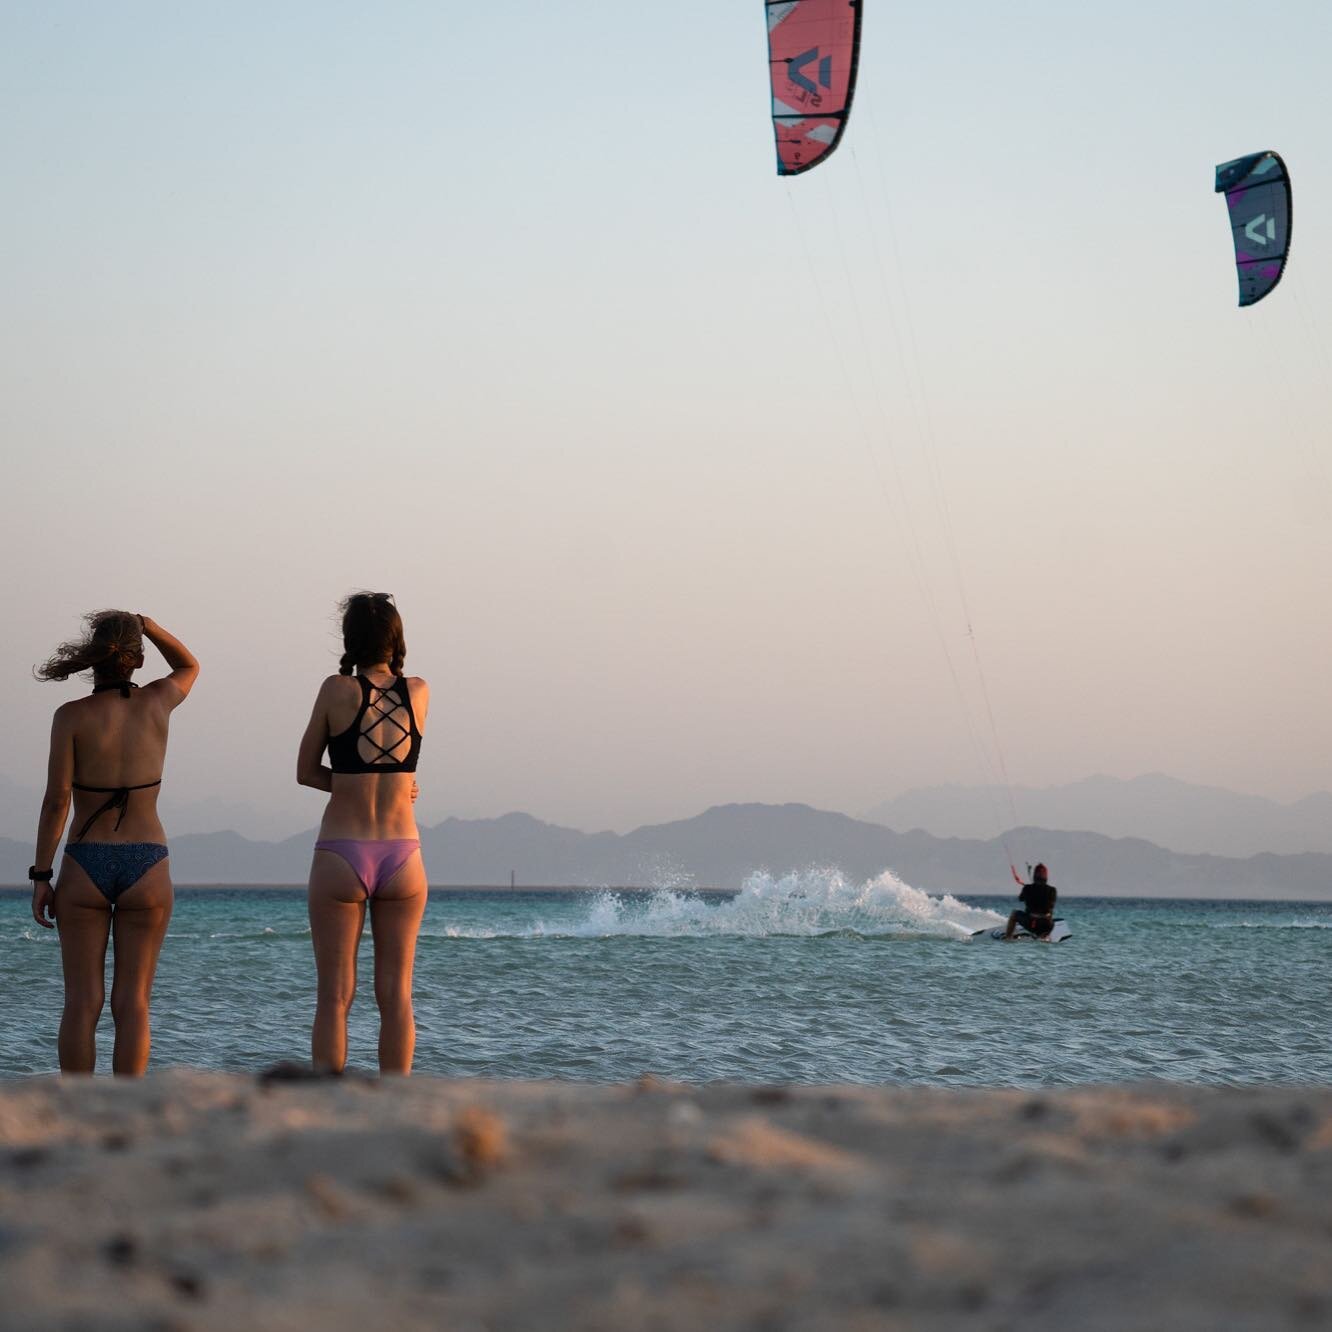 Sundowners on the Egypt Kite Cruise are magical. The wind gets smoother, the sky golden and the water reflects the warmth of the day.. the perfect ending to a perfect day. 

#kitesurf #egypt #redsea #kitecruise #sunset